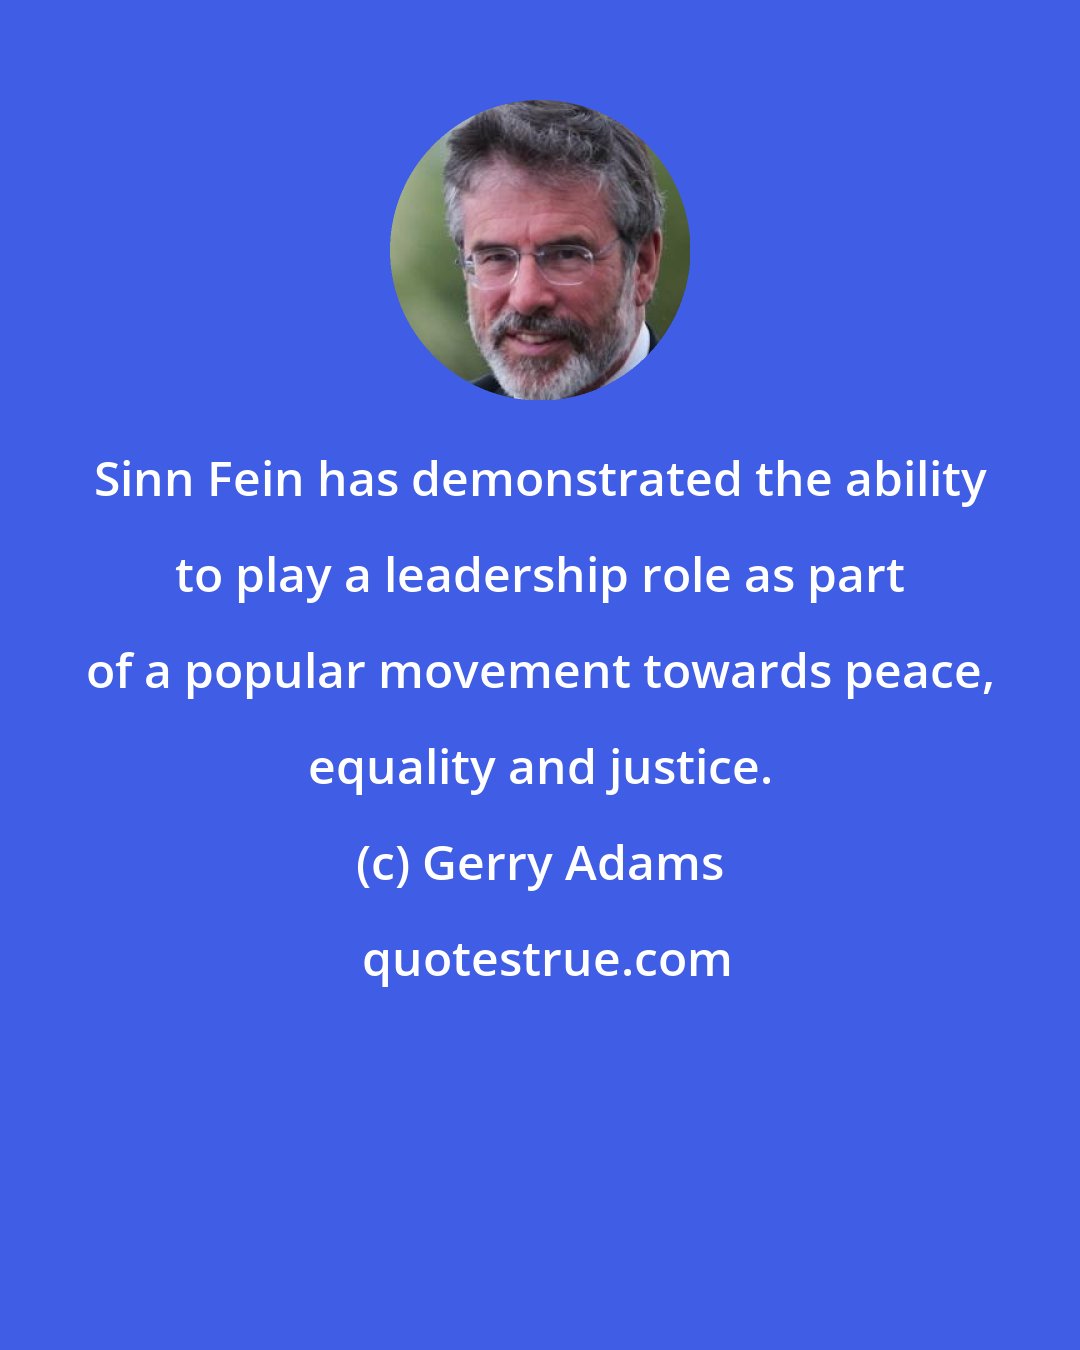 Gerry Adams: Sinn Fein has demonstrated the ability to play a leadership role as part of a popular movement towards peace, equality and justice.